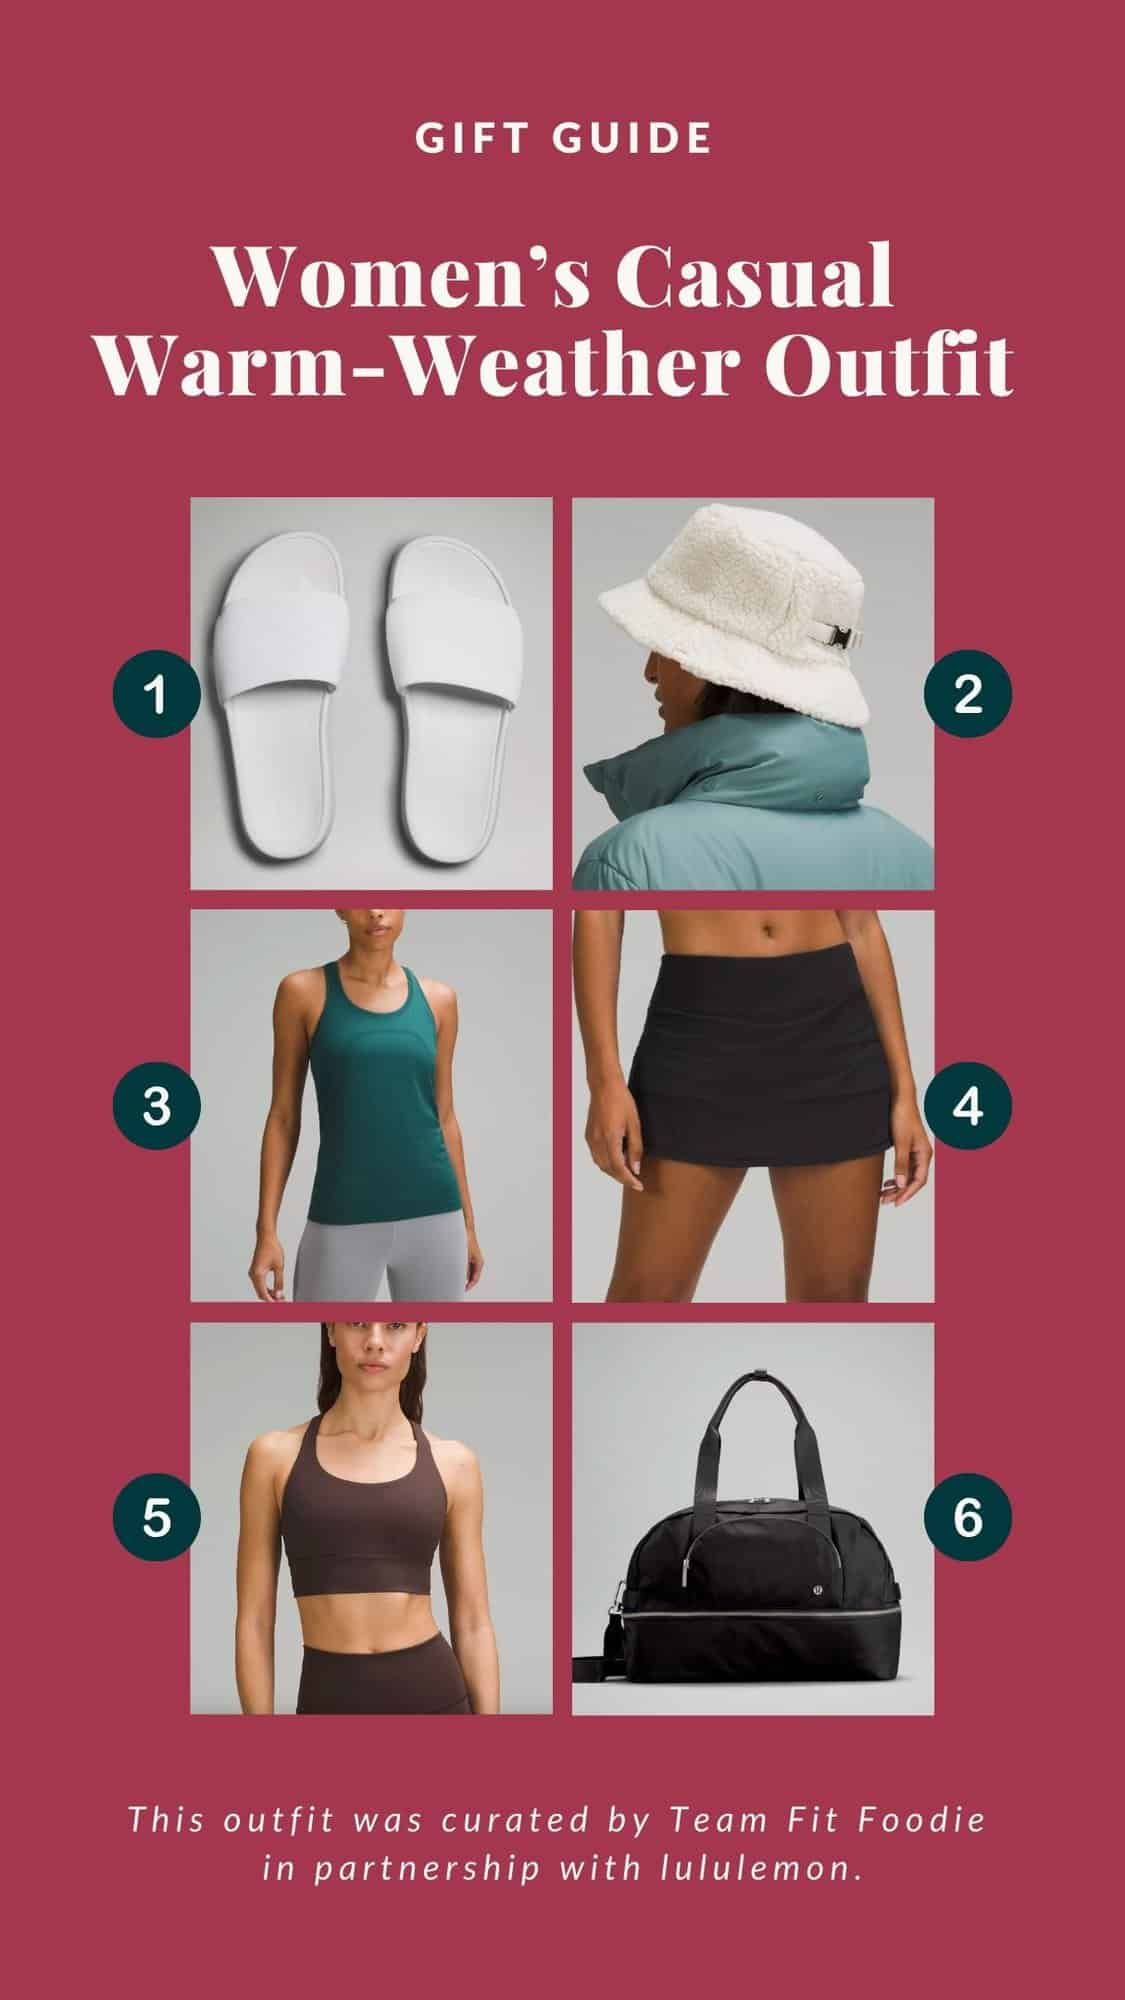 A gift guide for women's casual warm weather outfit.